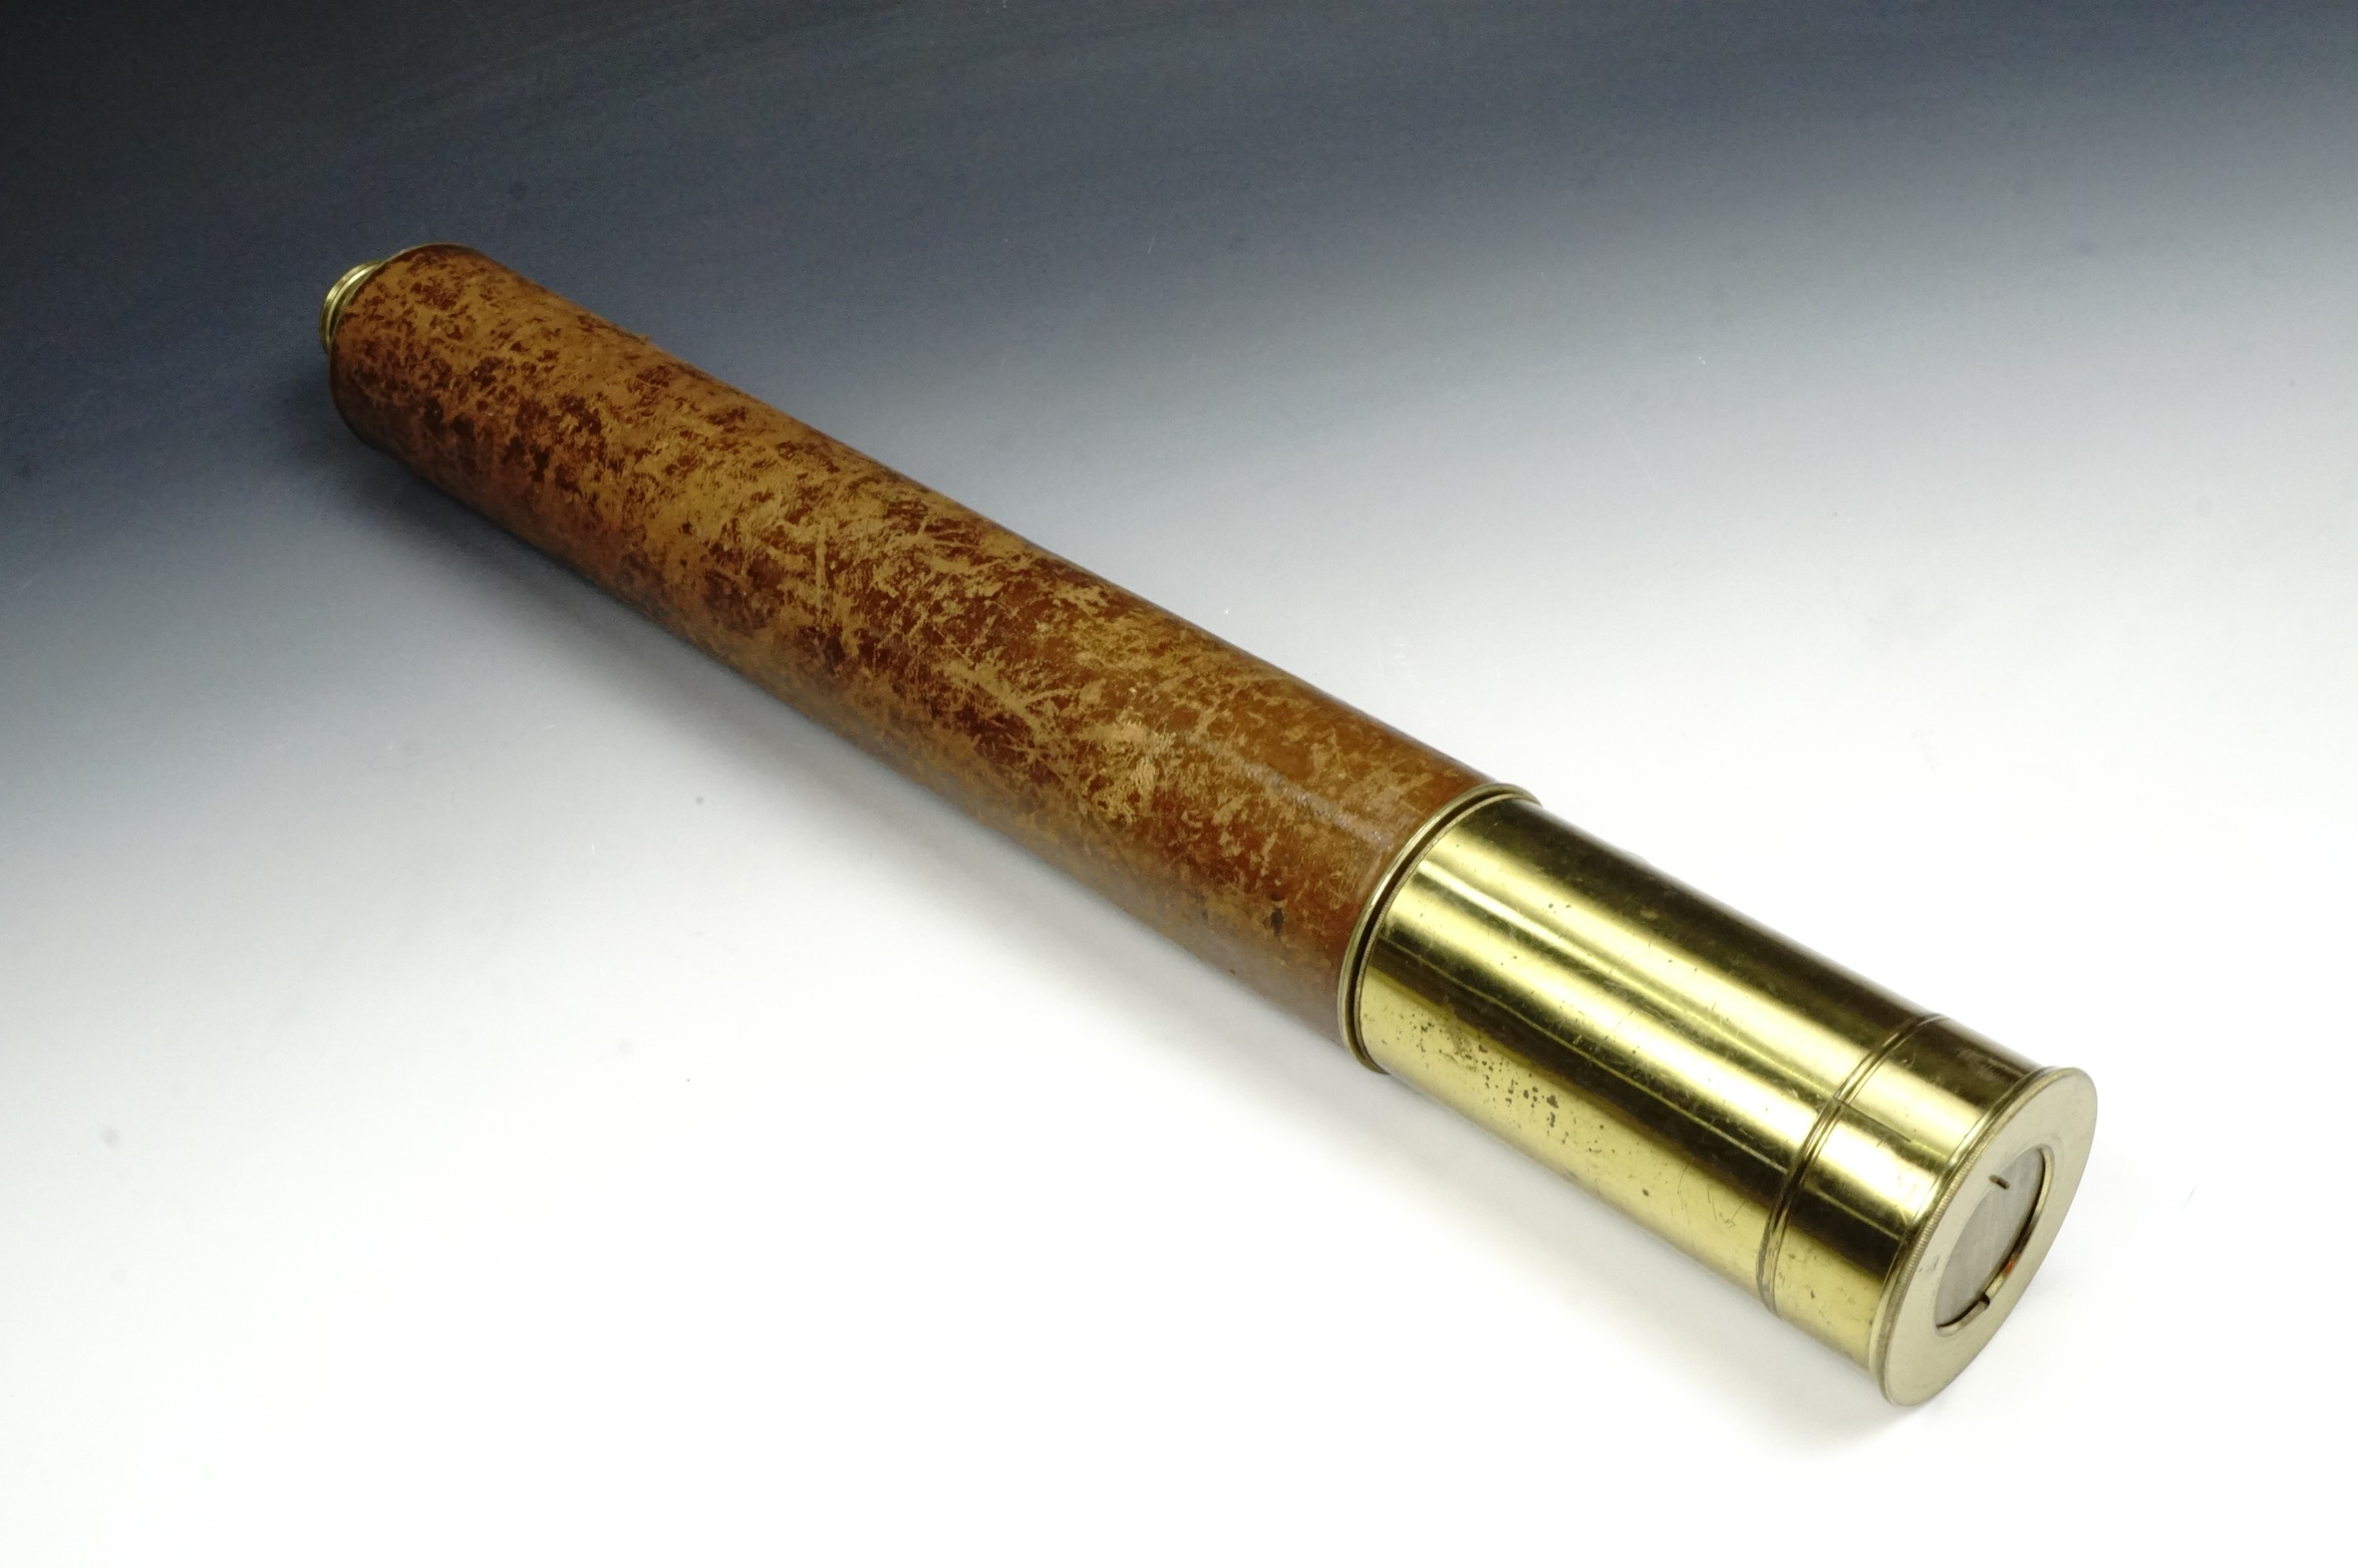 A Victorian Anchor trade mark "Try Me" single draw brass telescope, having a 1 1/2 inch objective, - Image 2 of 4